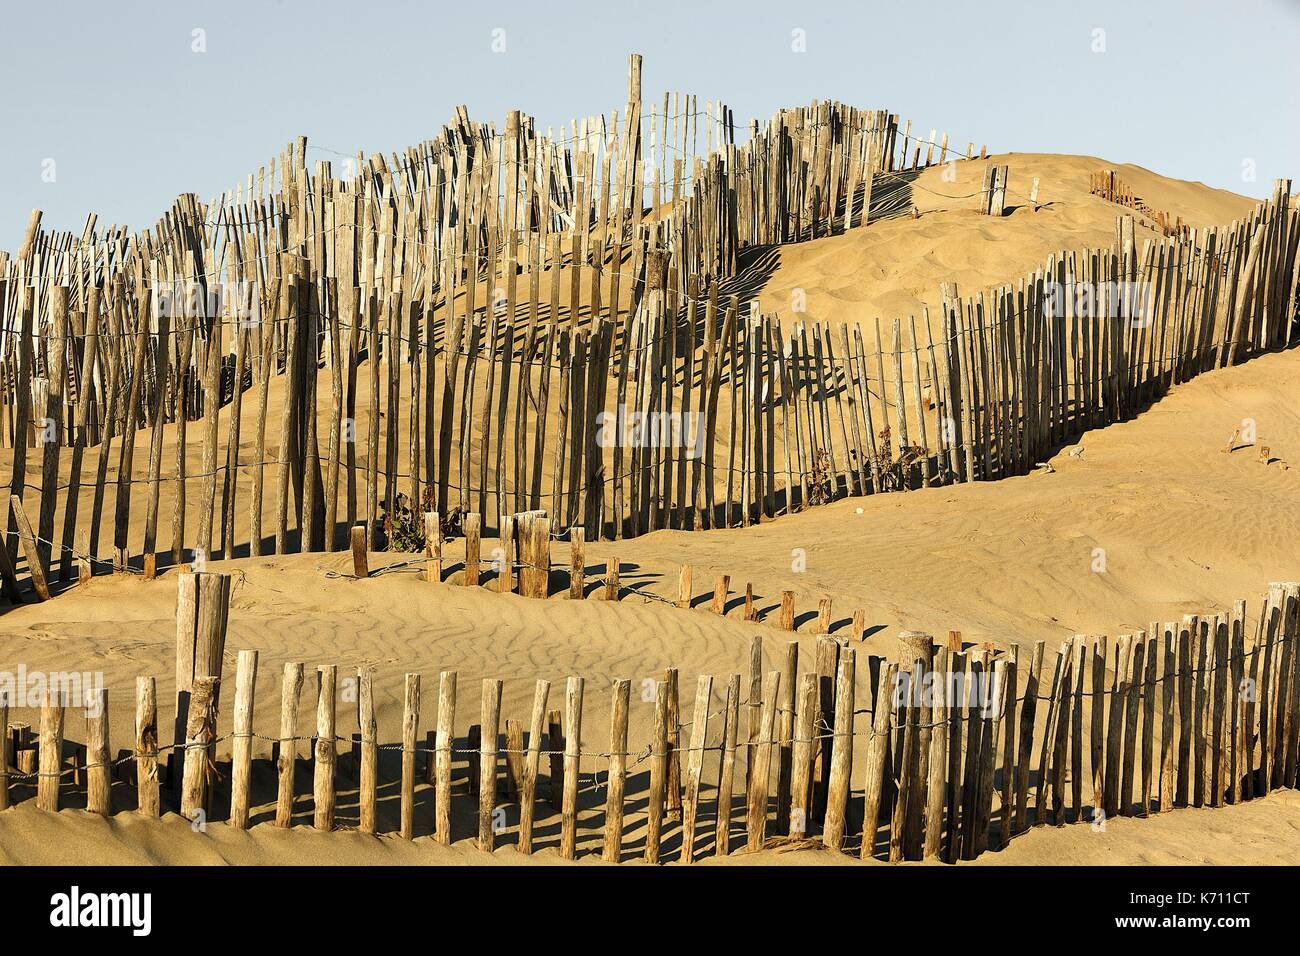 France, Gard, Site protected by the Conservatoire du Littoral, Espiguette, dune fixation barriers Stock Photo